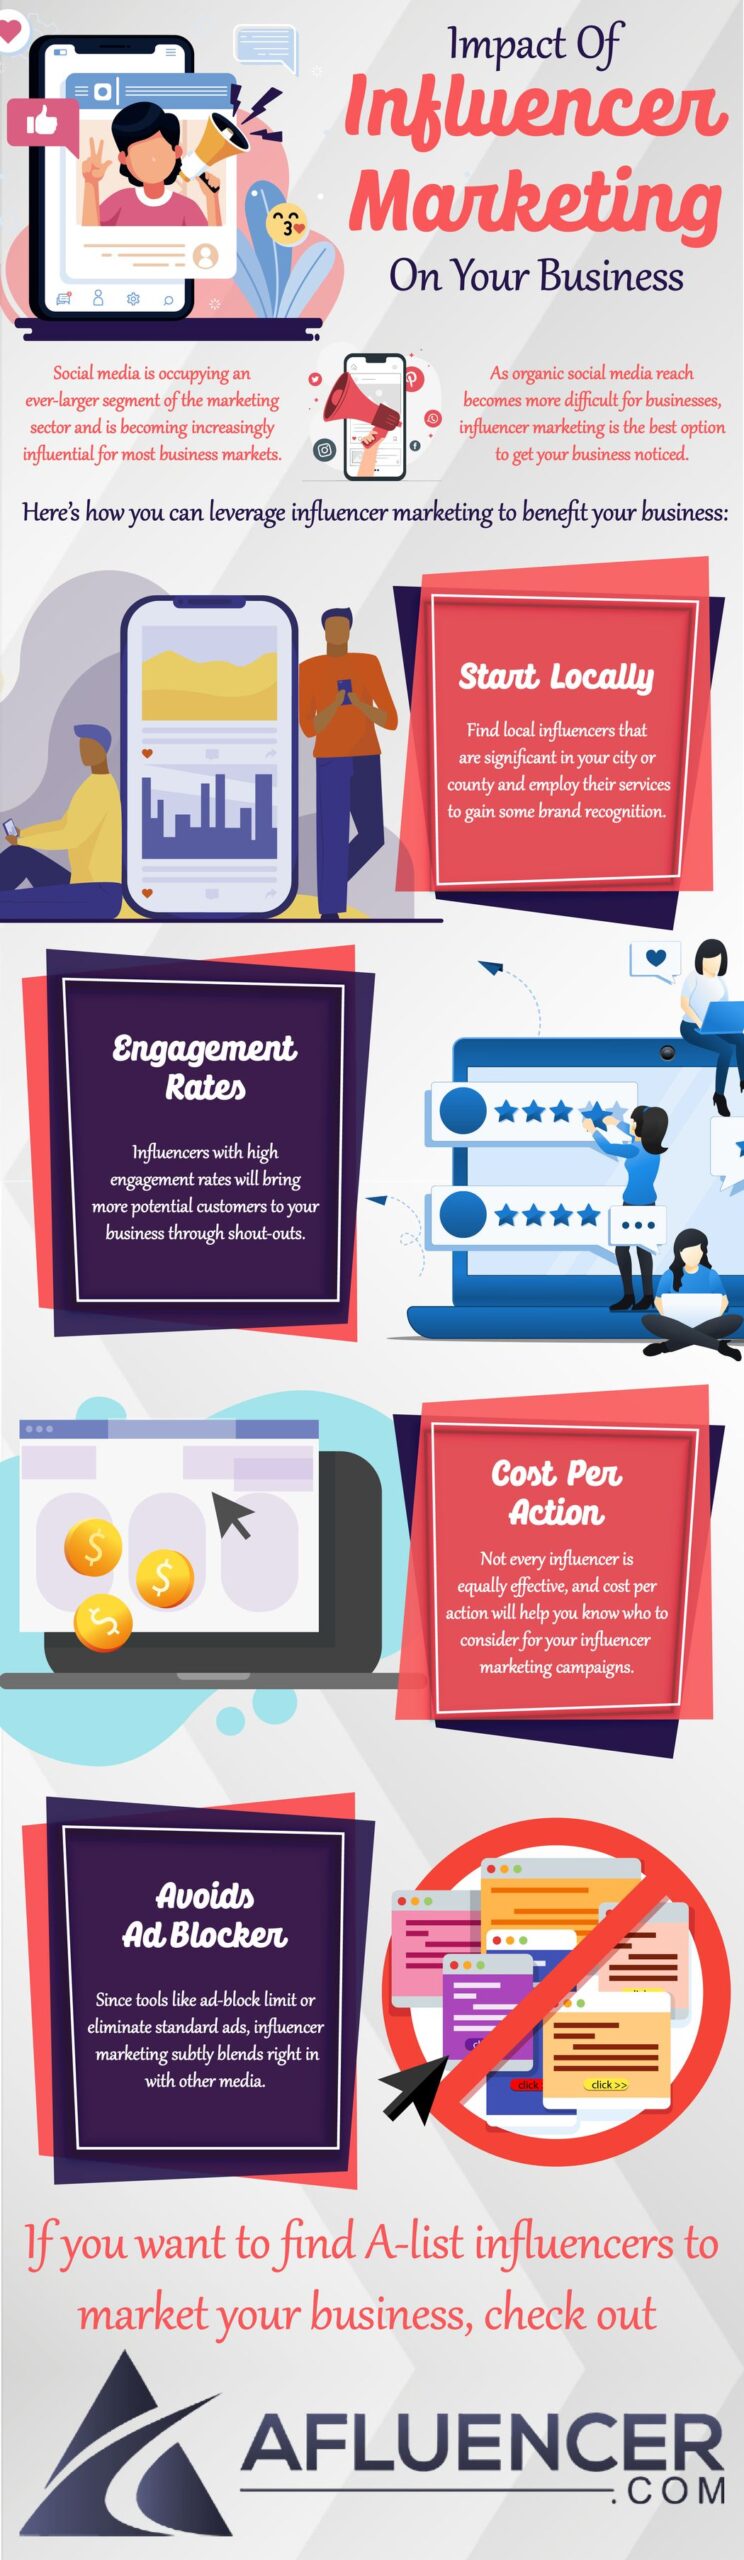 Impact Of Influencer Marketing On Your Business - Infographic